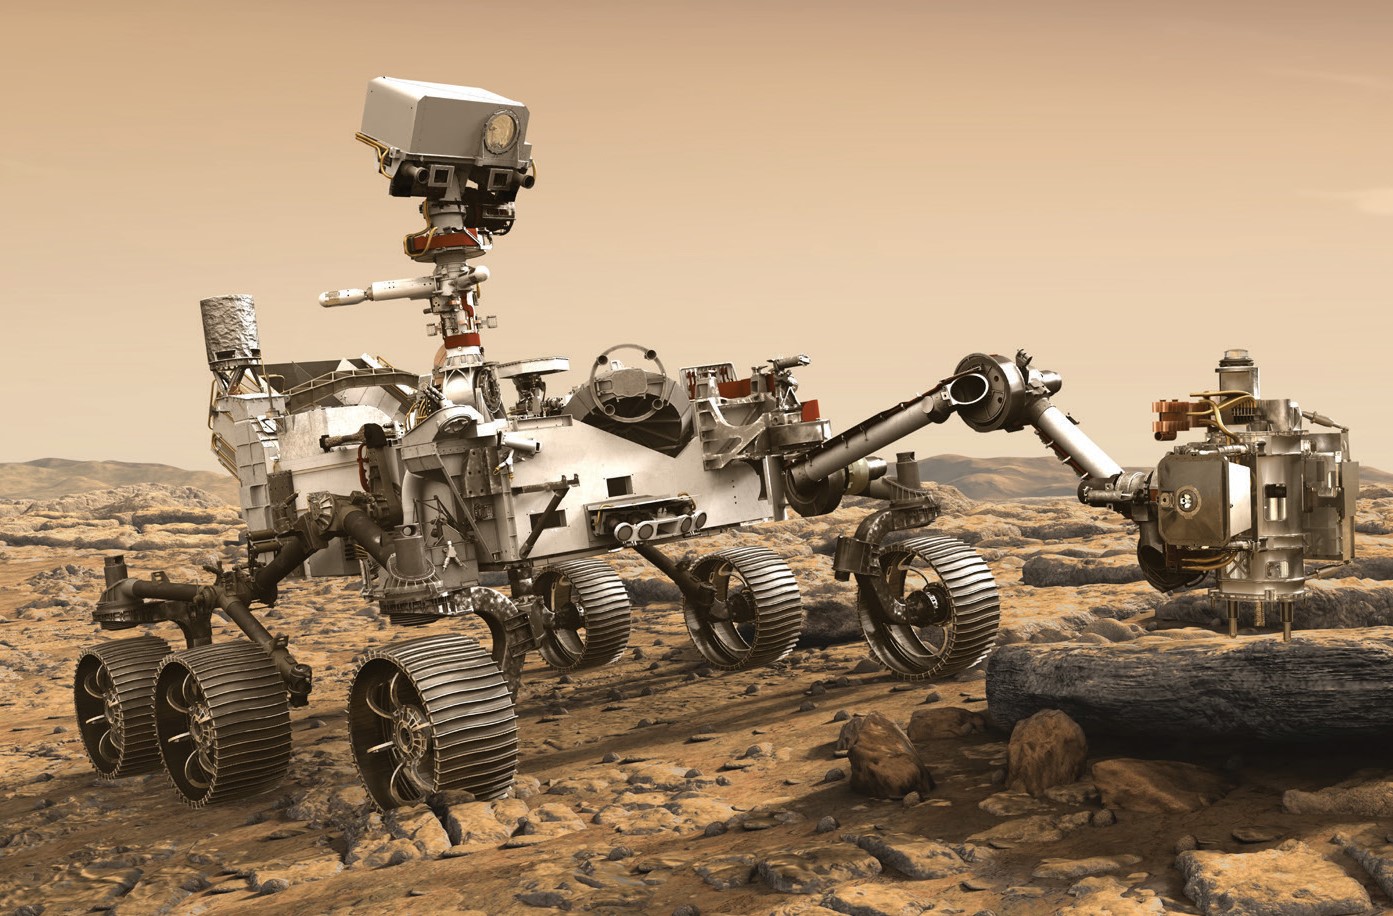 20-mind-blowing-facts-about-mars-rovers